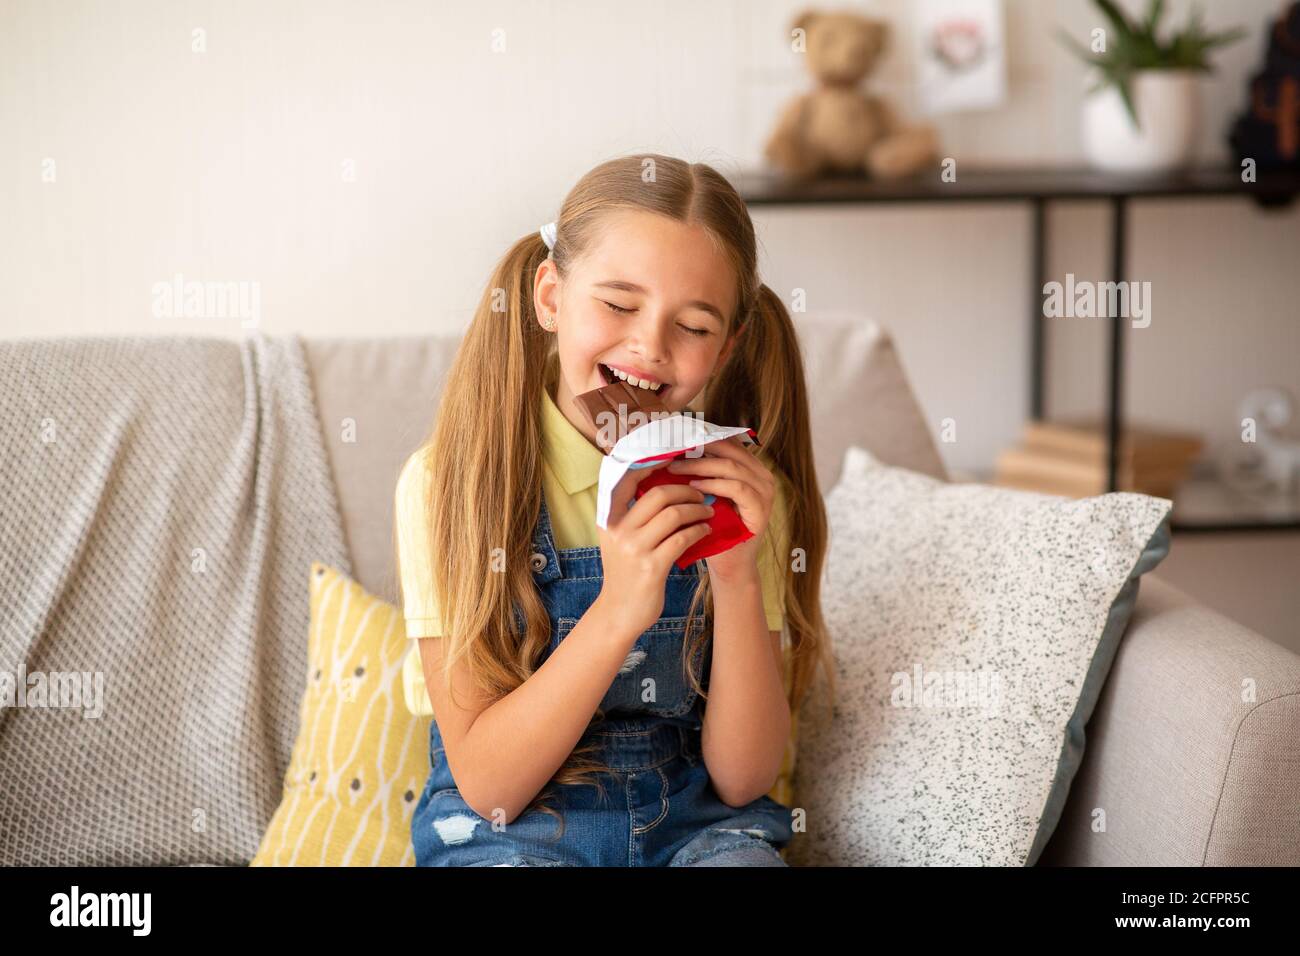 Girl eating chocolate sitting on a couch at home Stock Photo